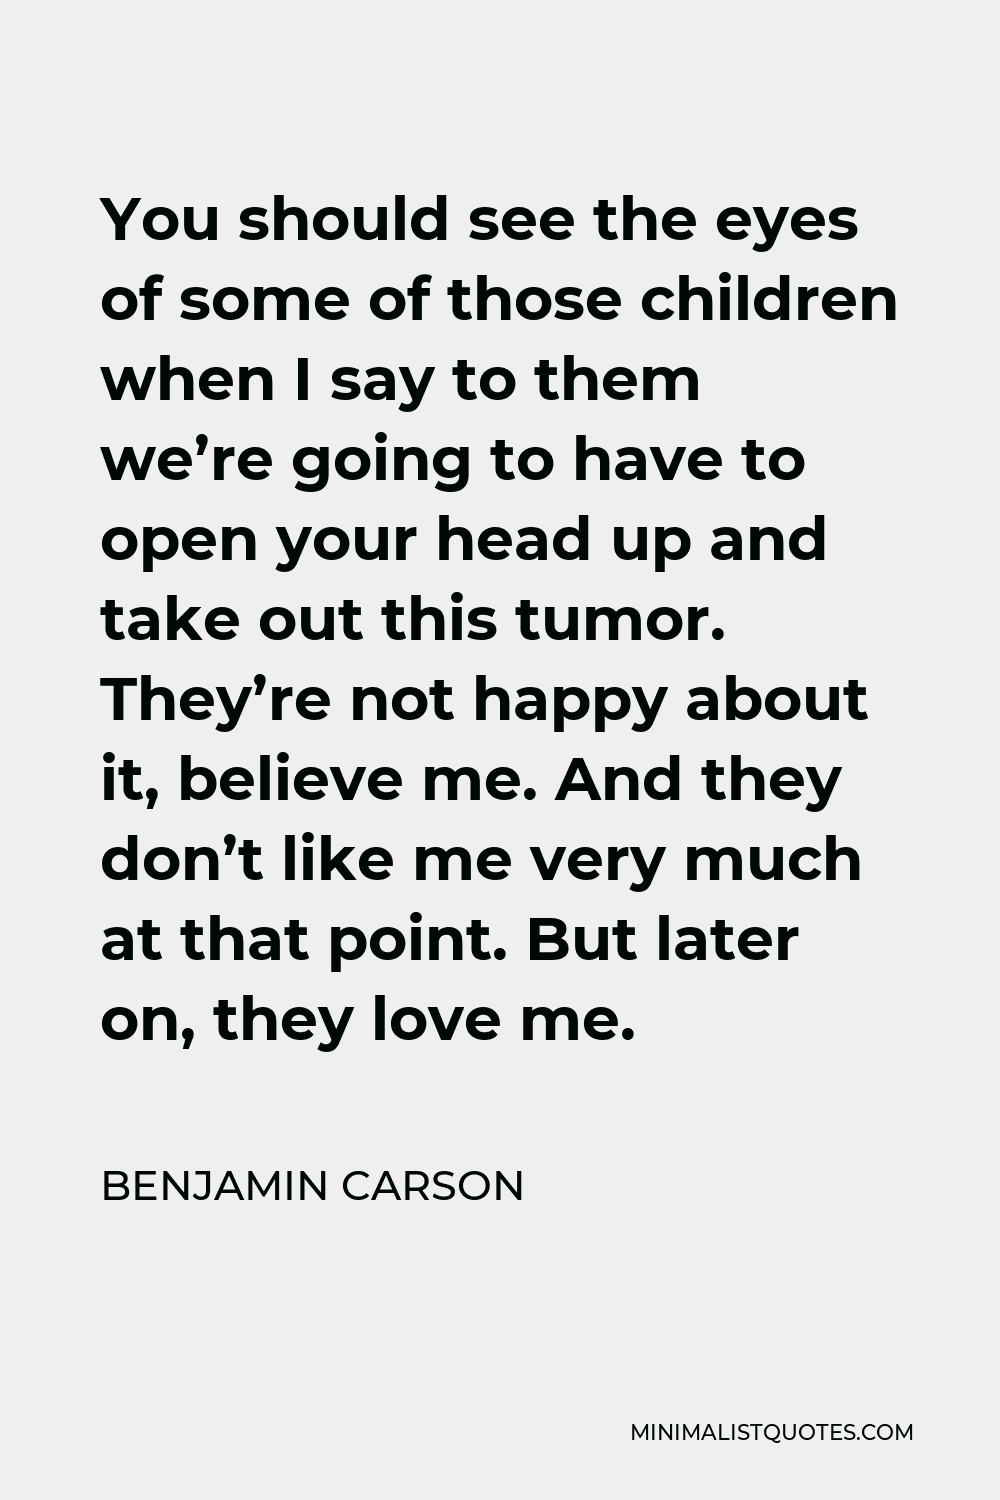 Benjamin Carson Quote - You should see the eyes of some of those children when I say to them we’re going to have to open your head up and take out this tumor. They’re not happy about it, believe me. And they don’t like me very much at that point. But later on, they love me.